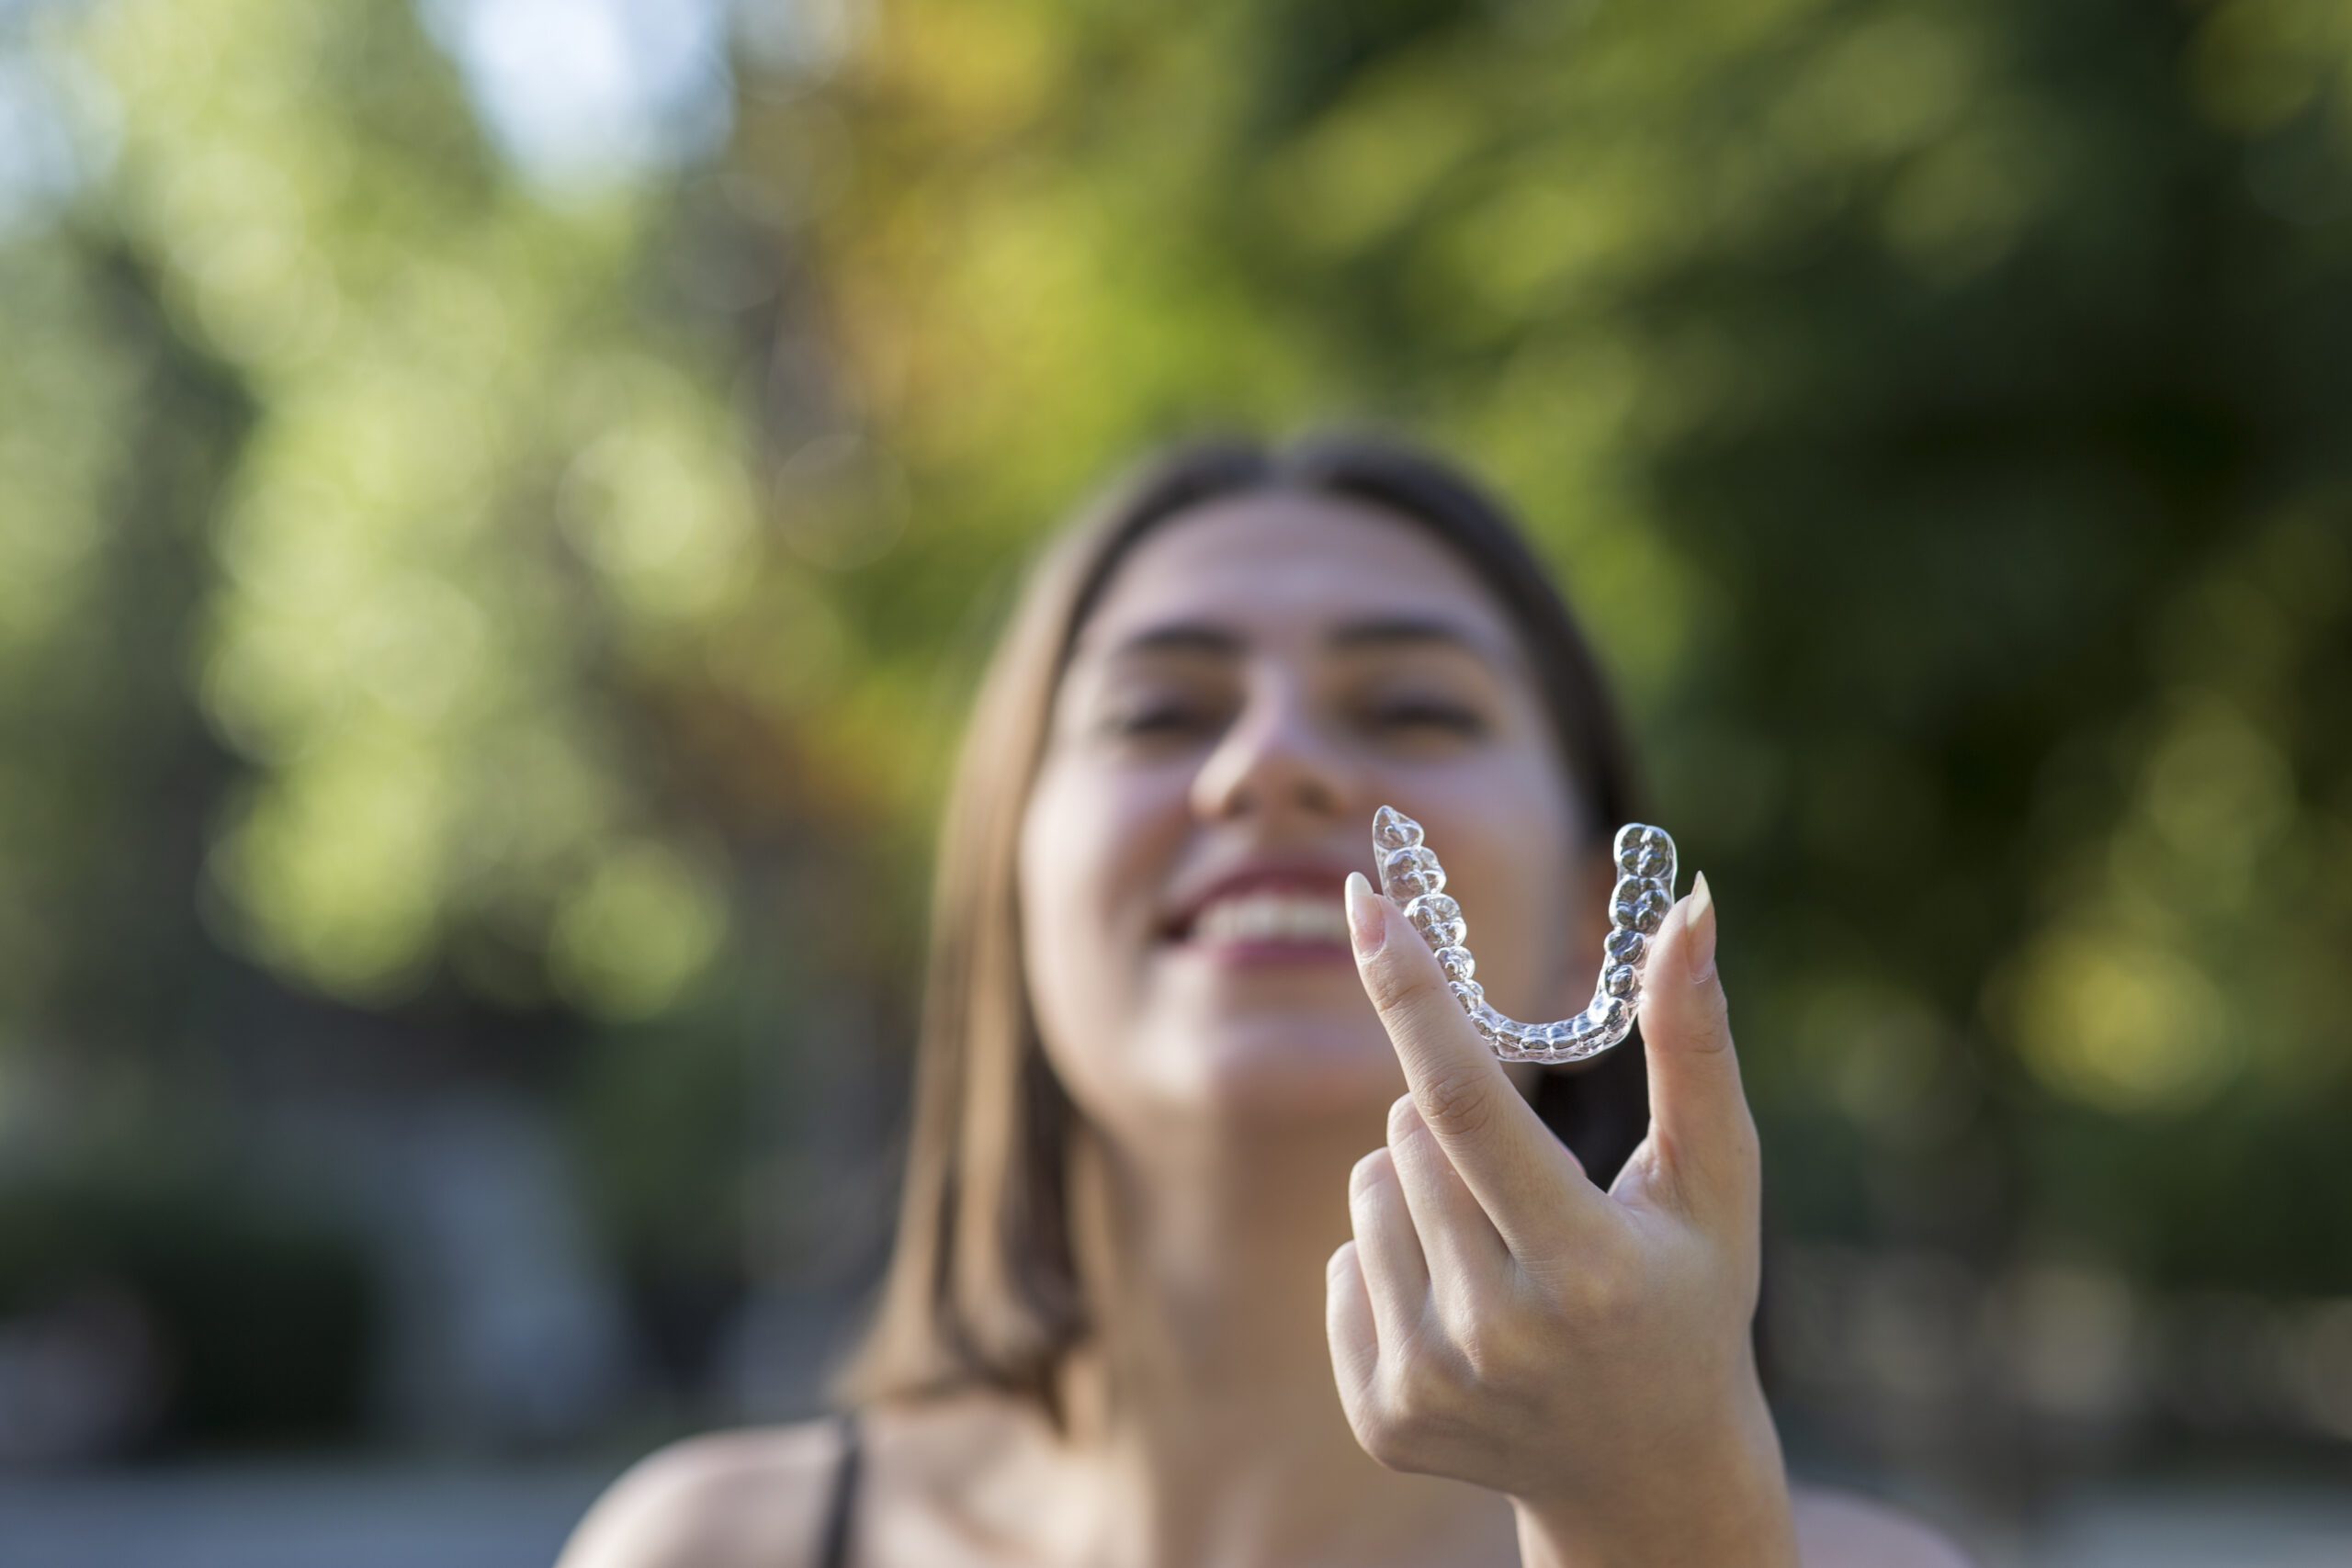 Woman smiling holding an invisalign